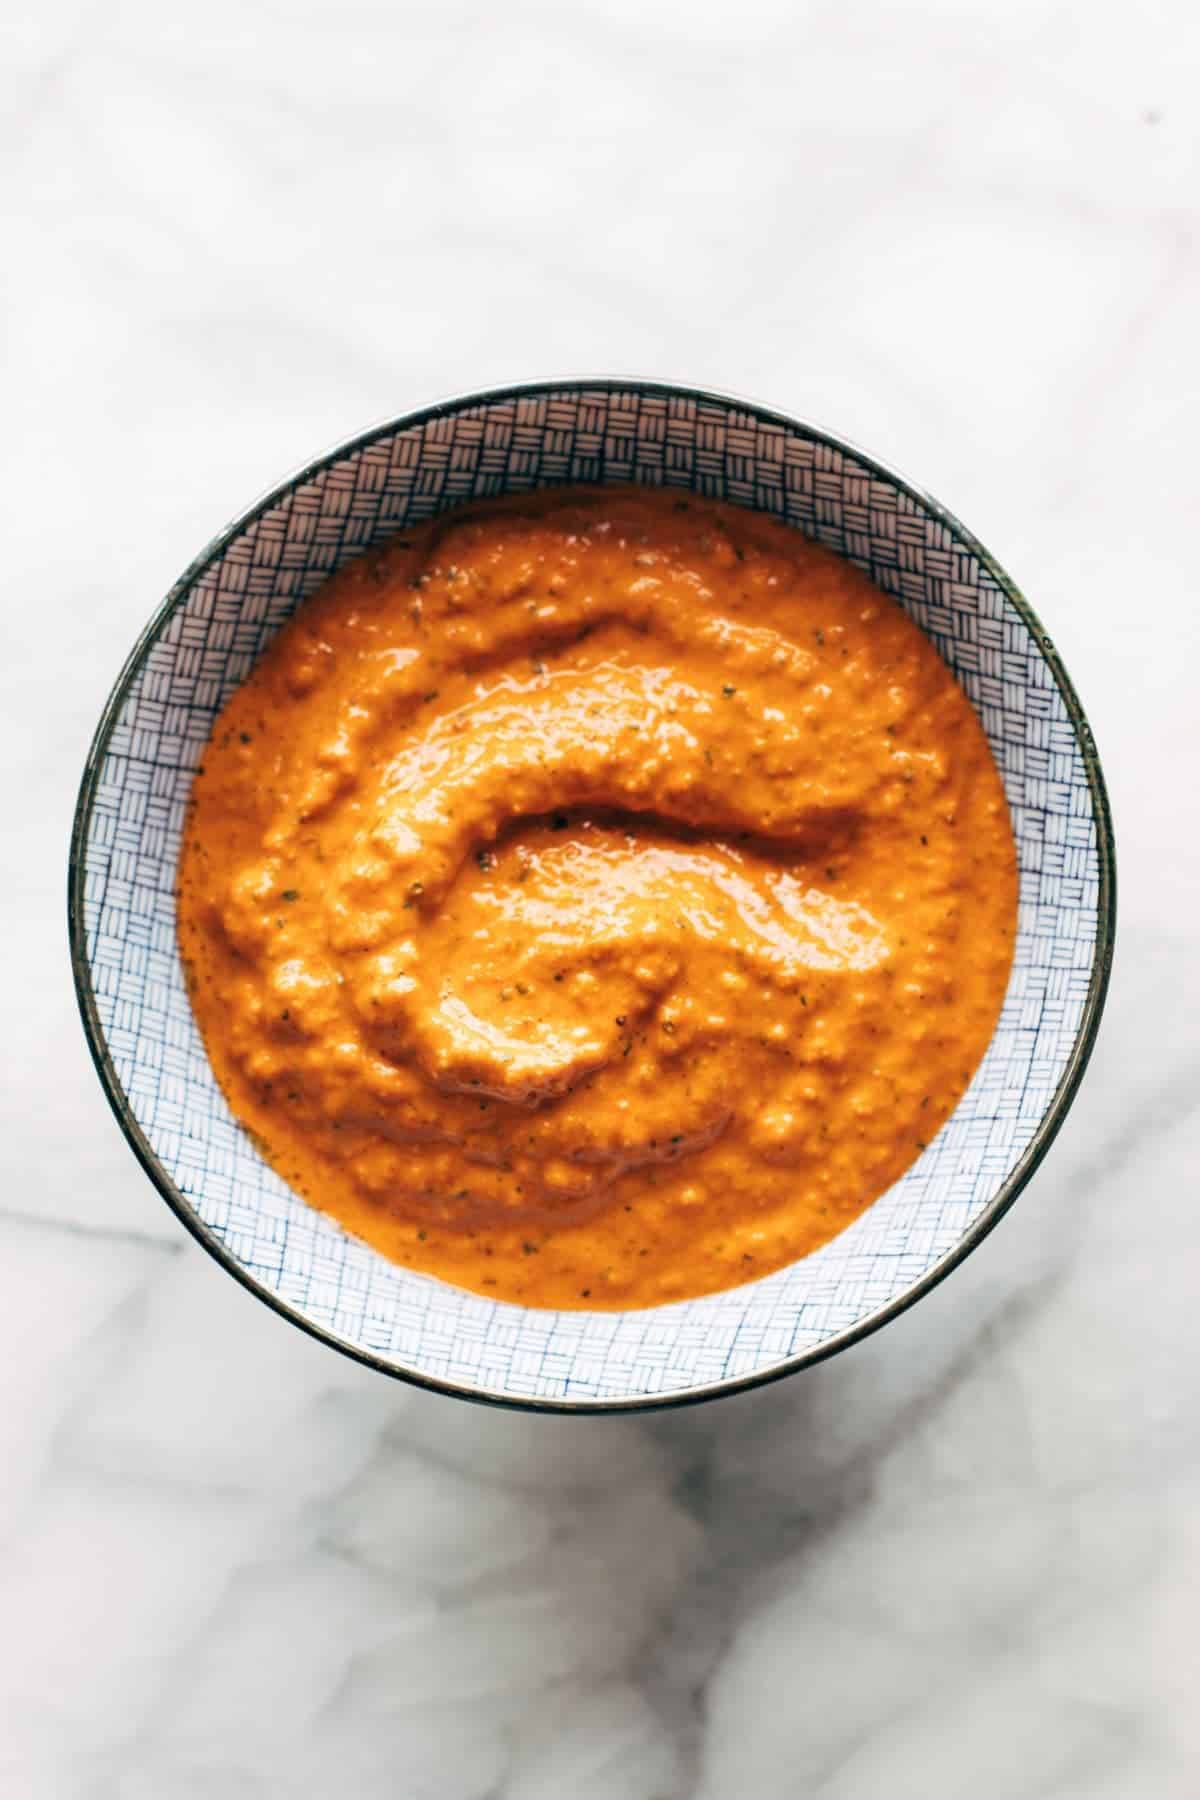 Red pepper sauce in a bowl.